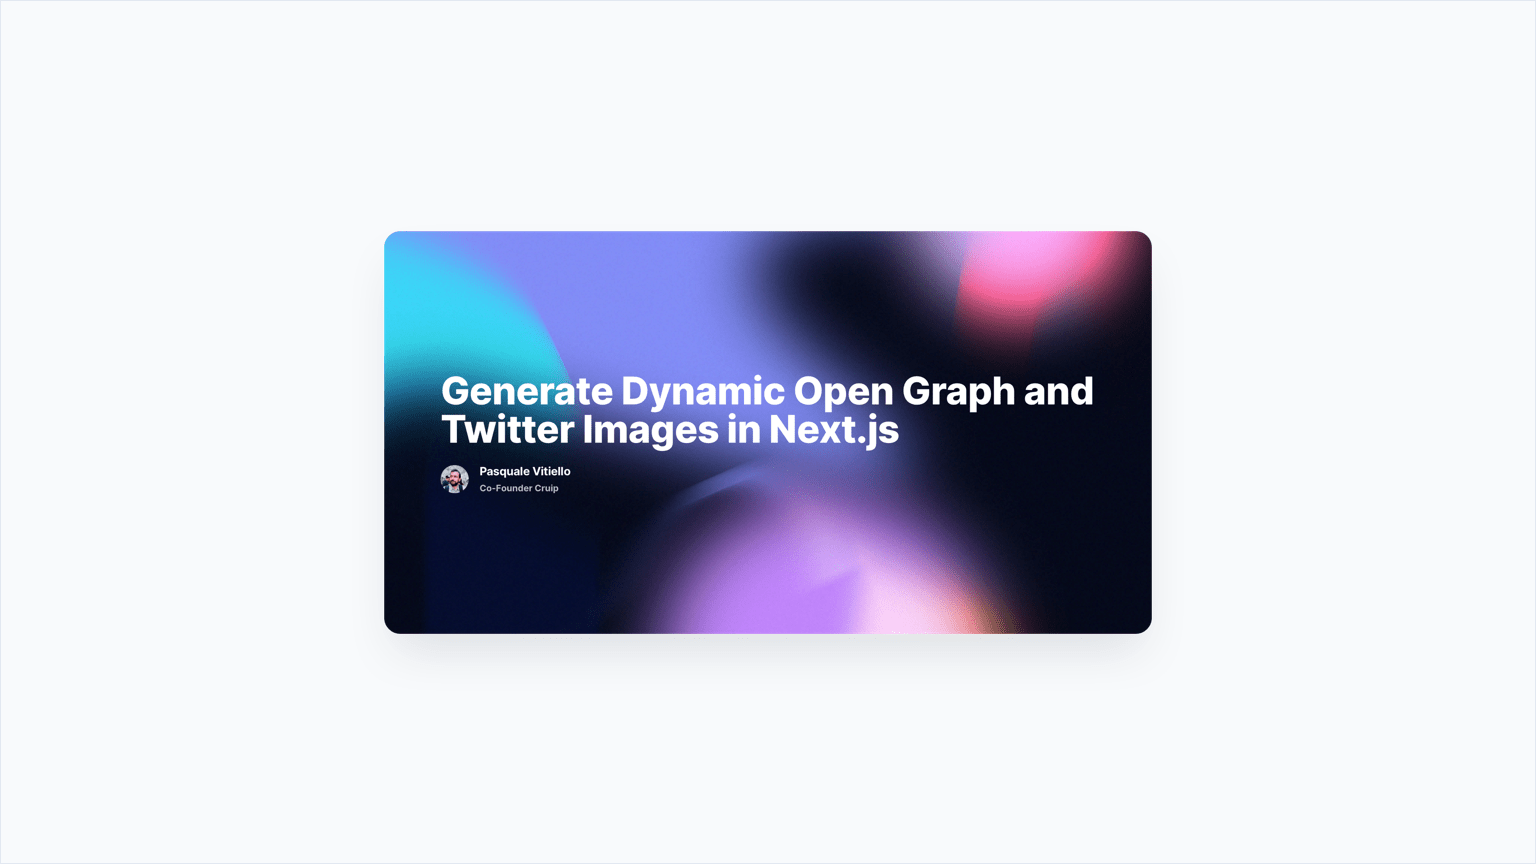 A preview of the OpenGraph image that we'll generate